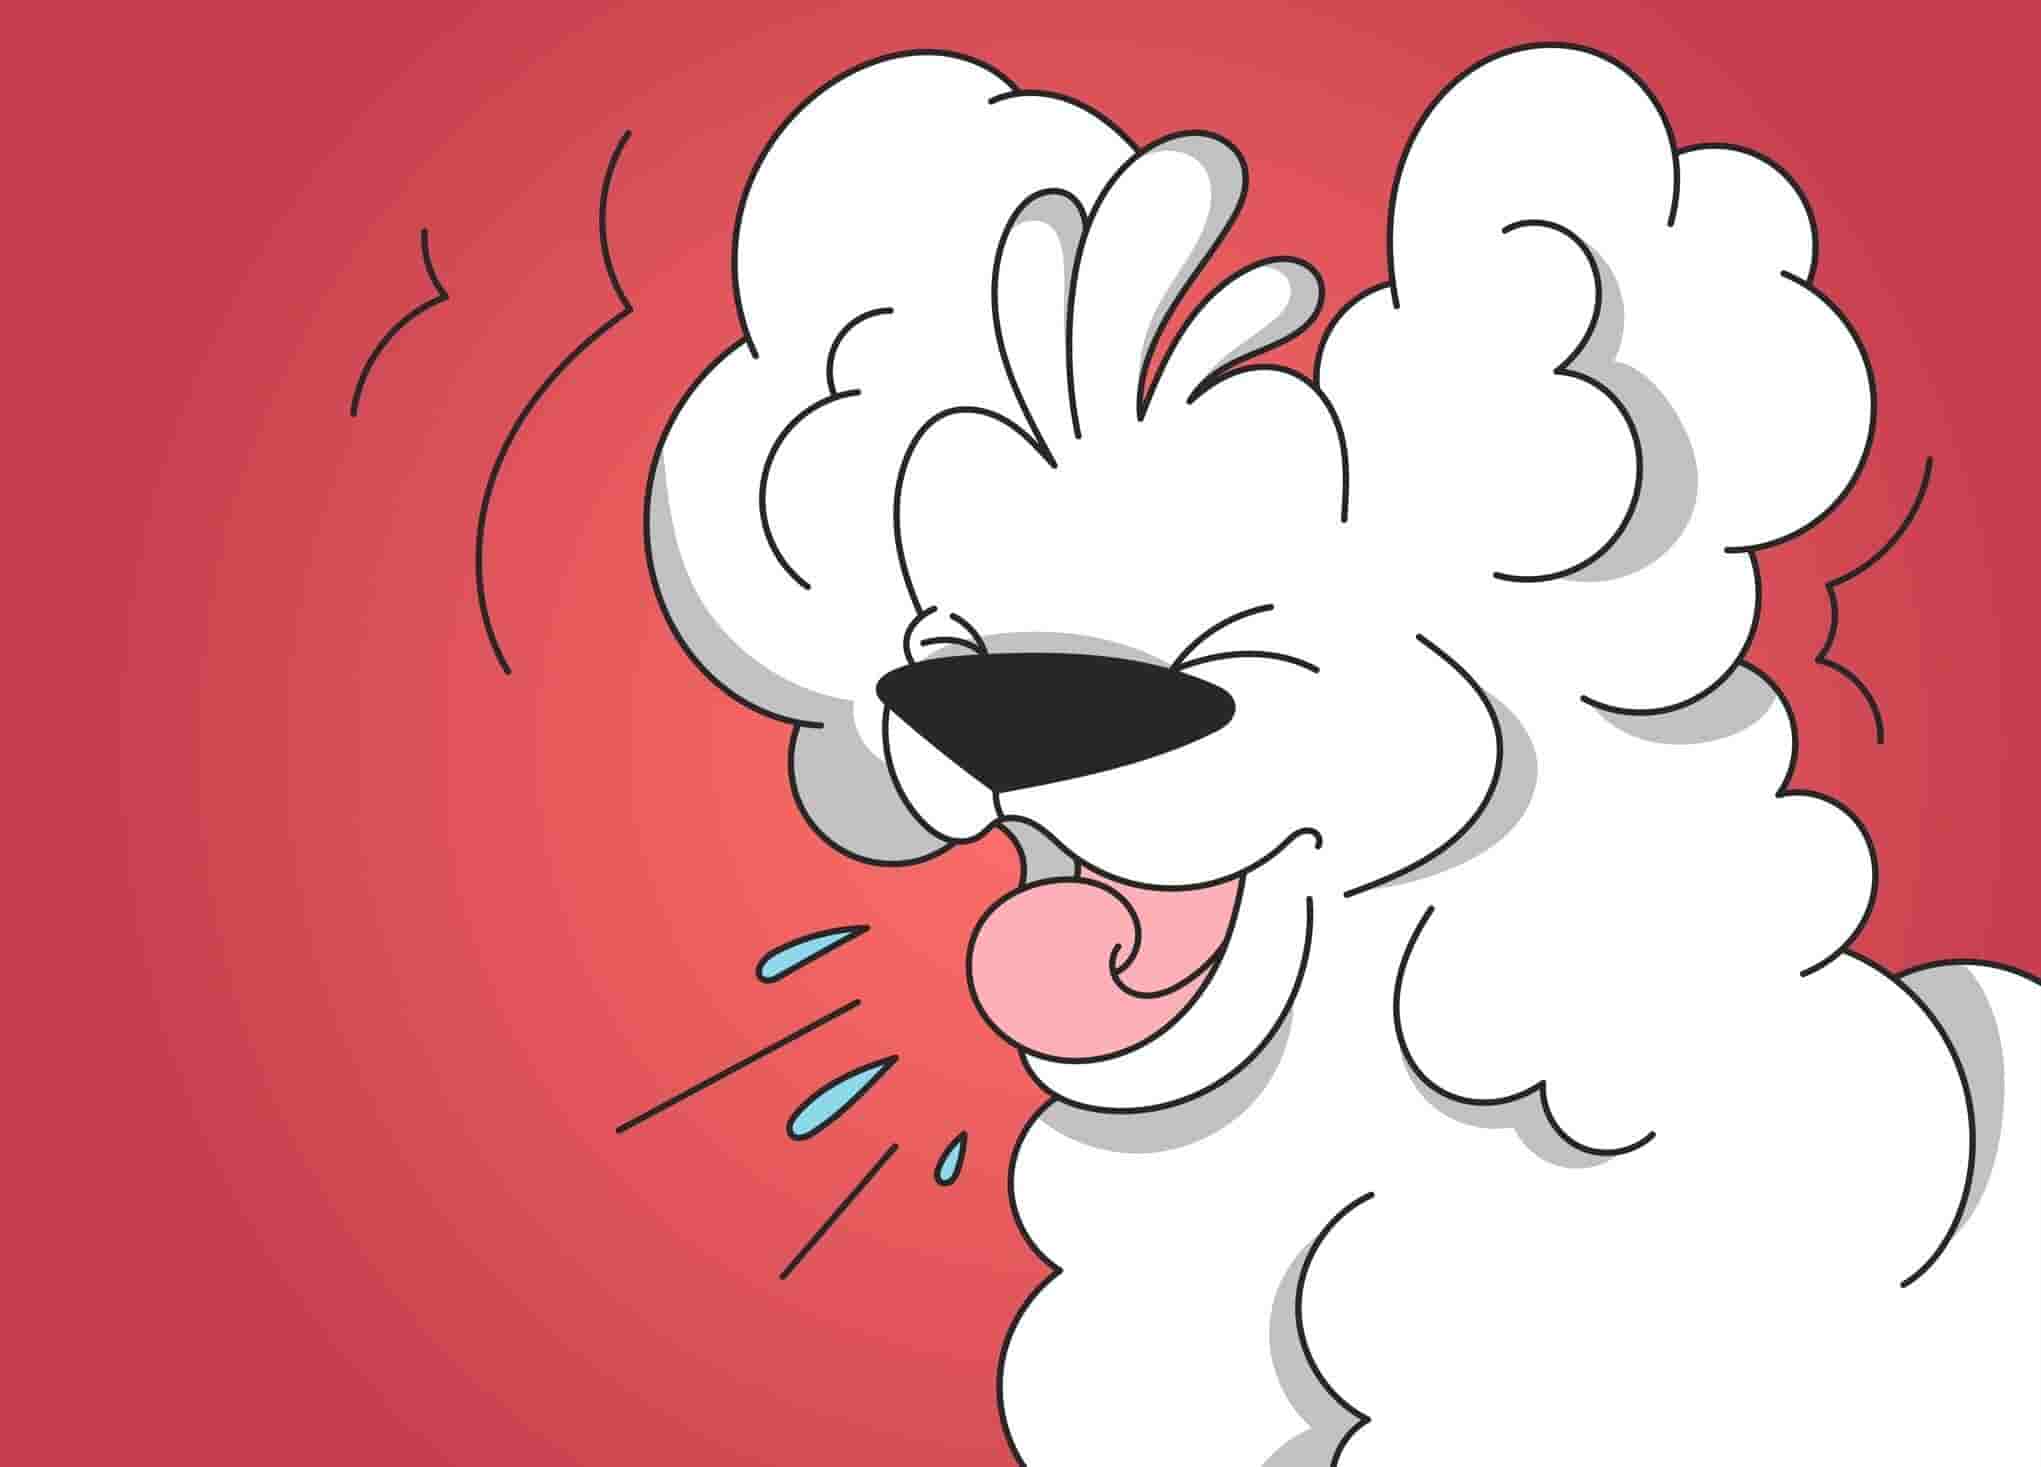 Bless You! Why Is My Dog Sneezing So Much?